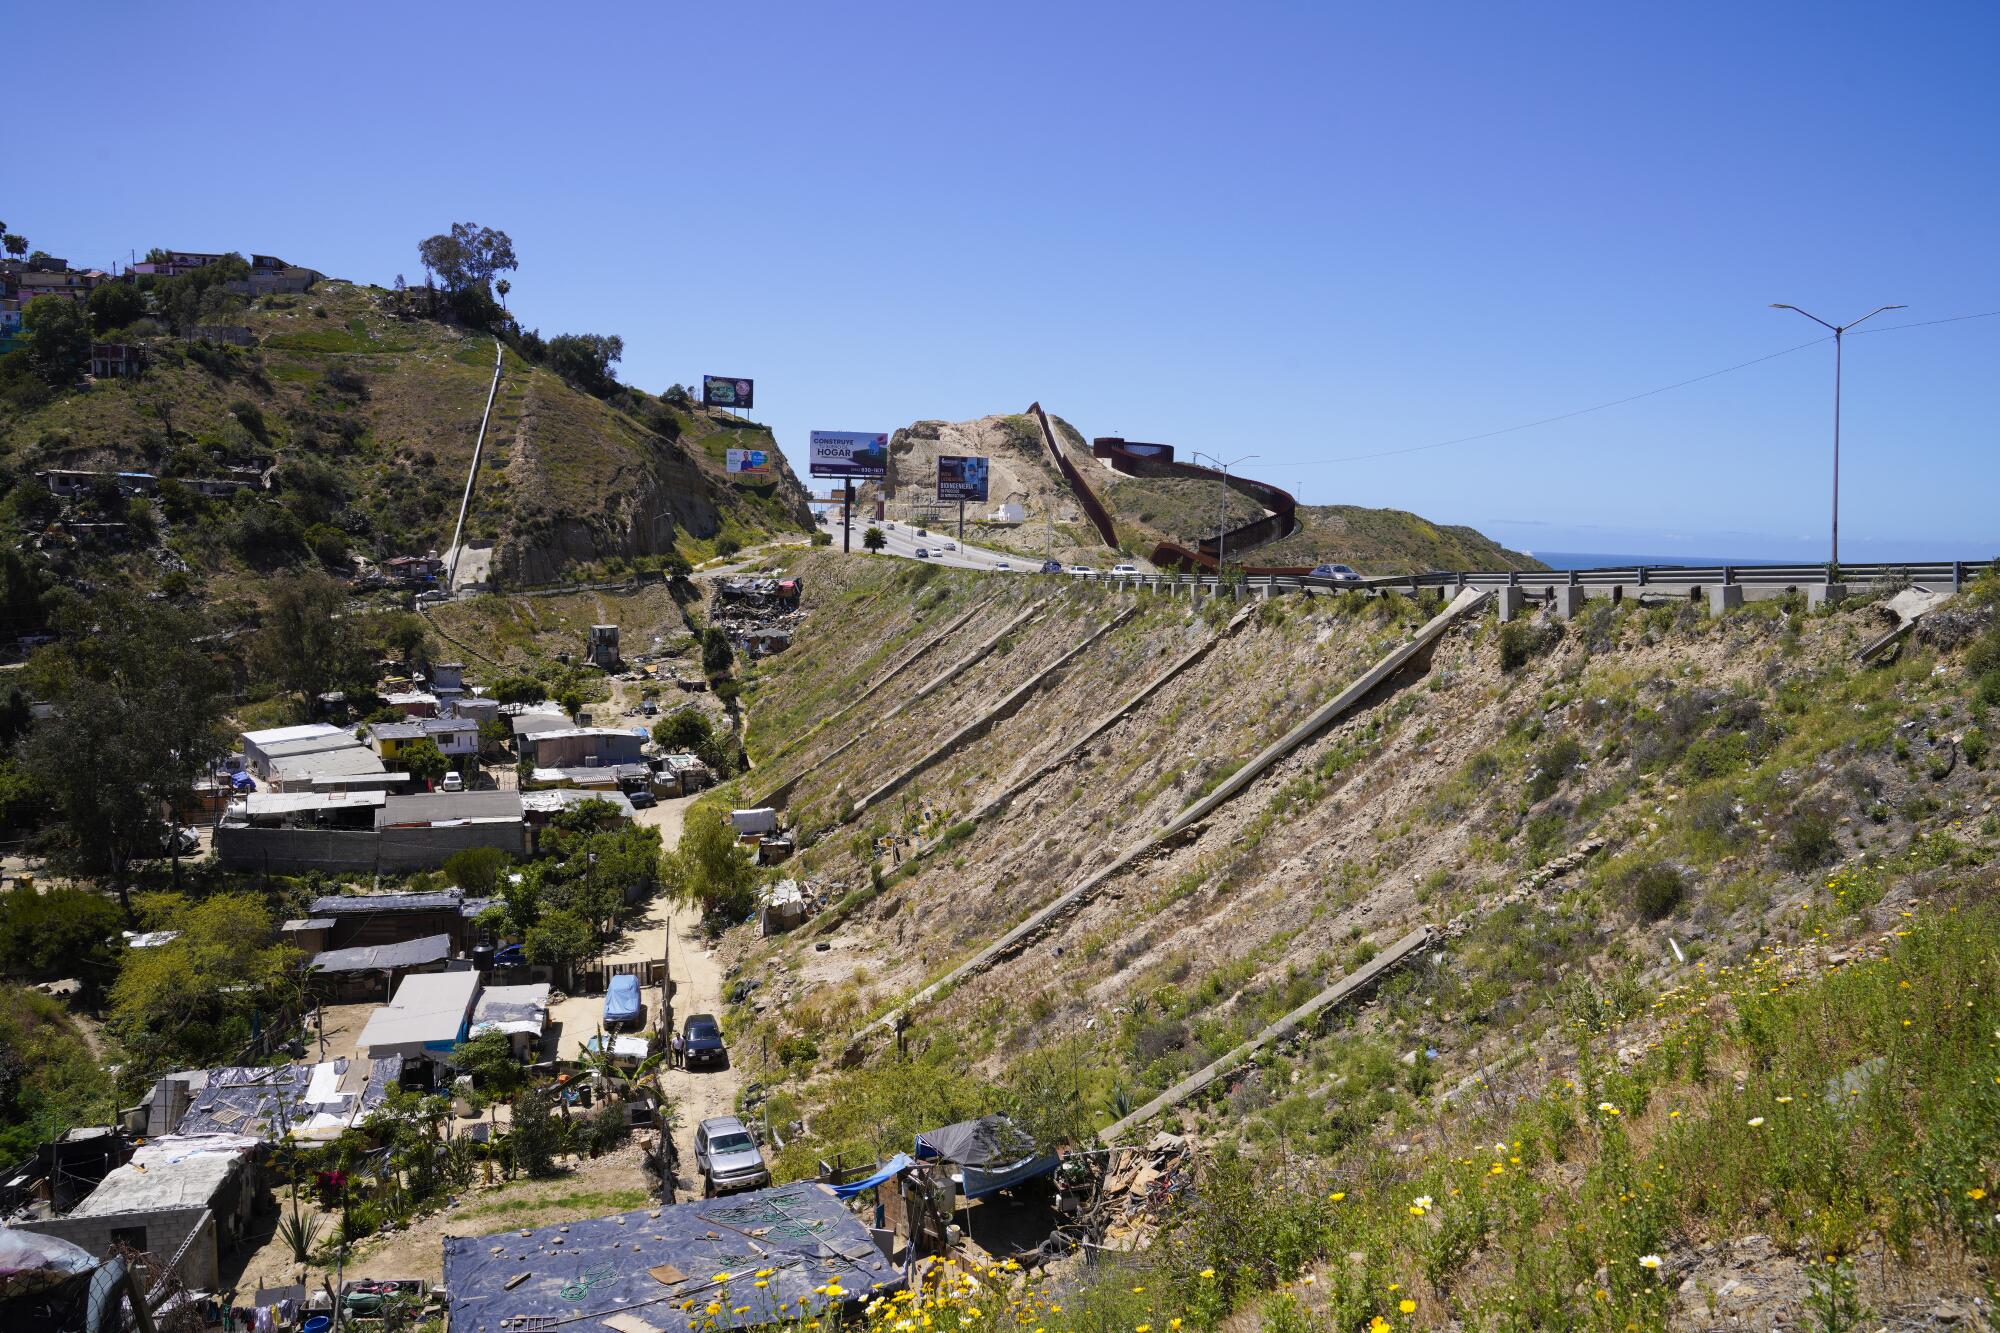 The U.S. Mexico border where Los Laureles Canyon empties into San Diego